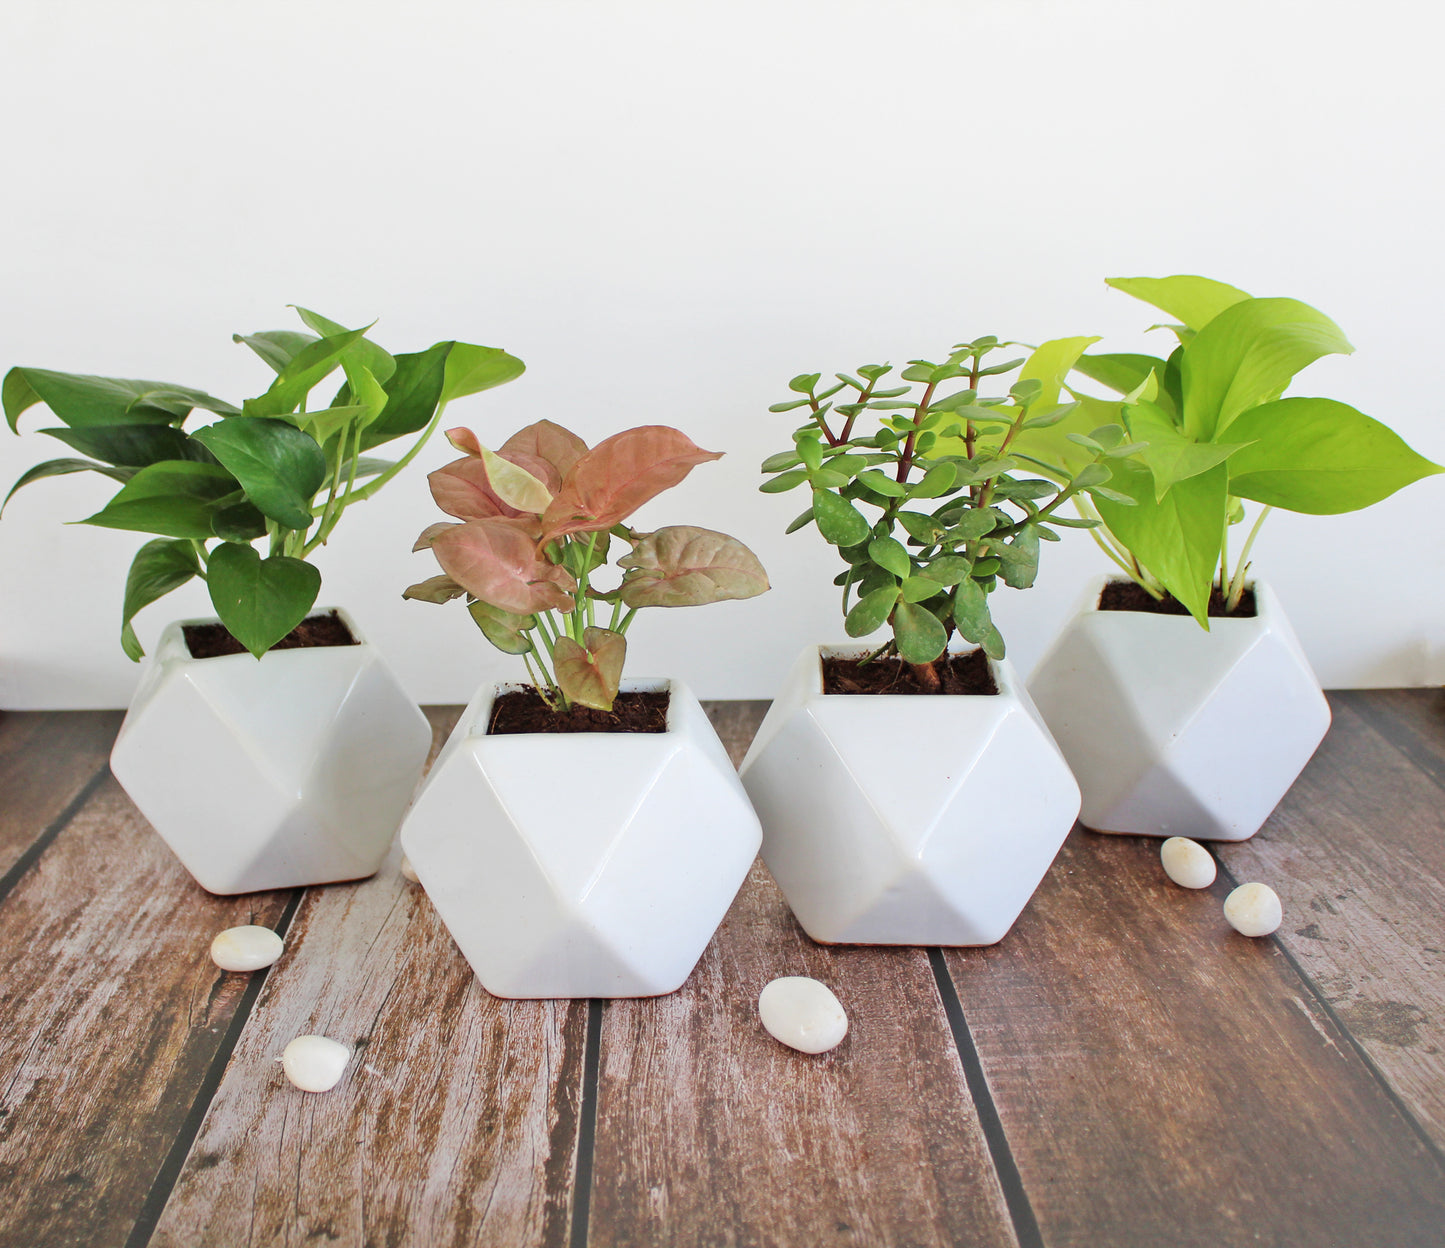 Rolling Nature Combo of Live Indoor Plants for Home Money Plant, Jade Plant, Pink Syngonium and Golden Pothos Plant in White Diamond Glacier Ceramic Pots